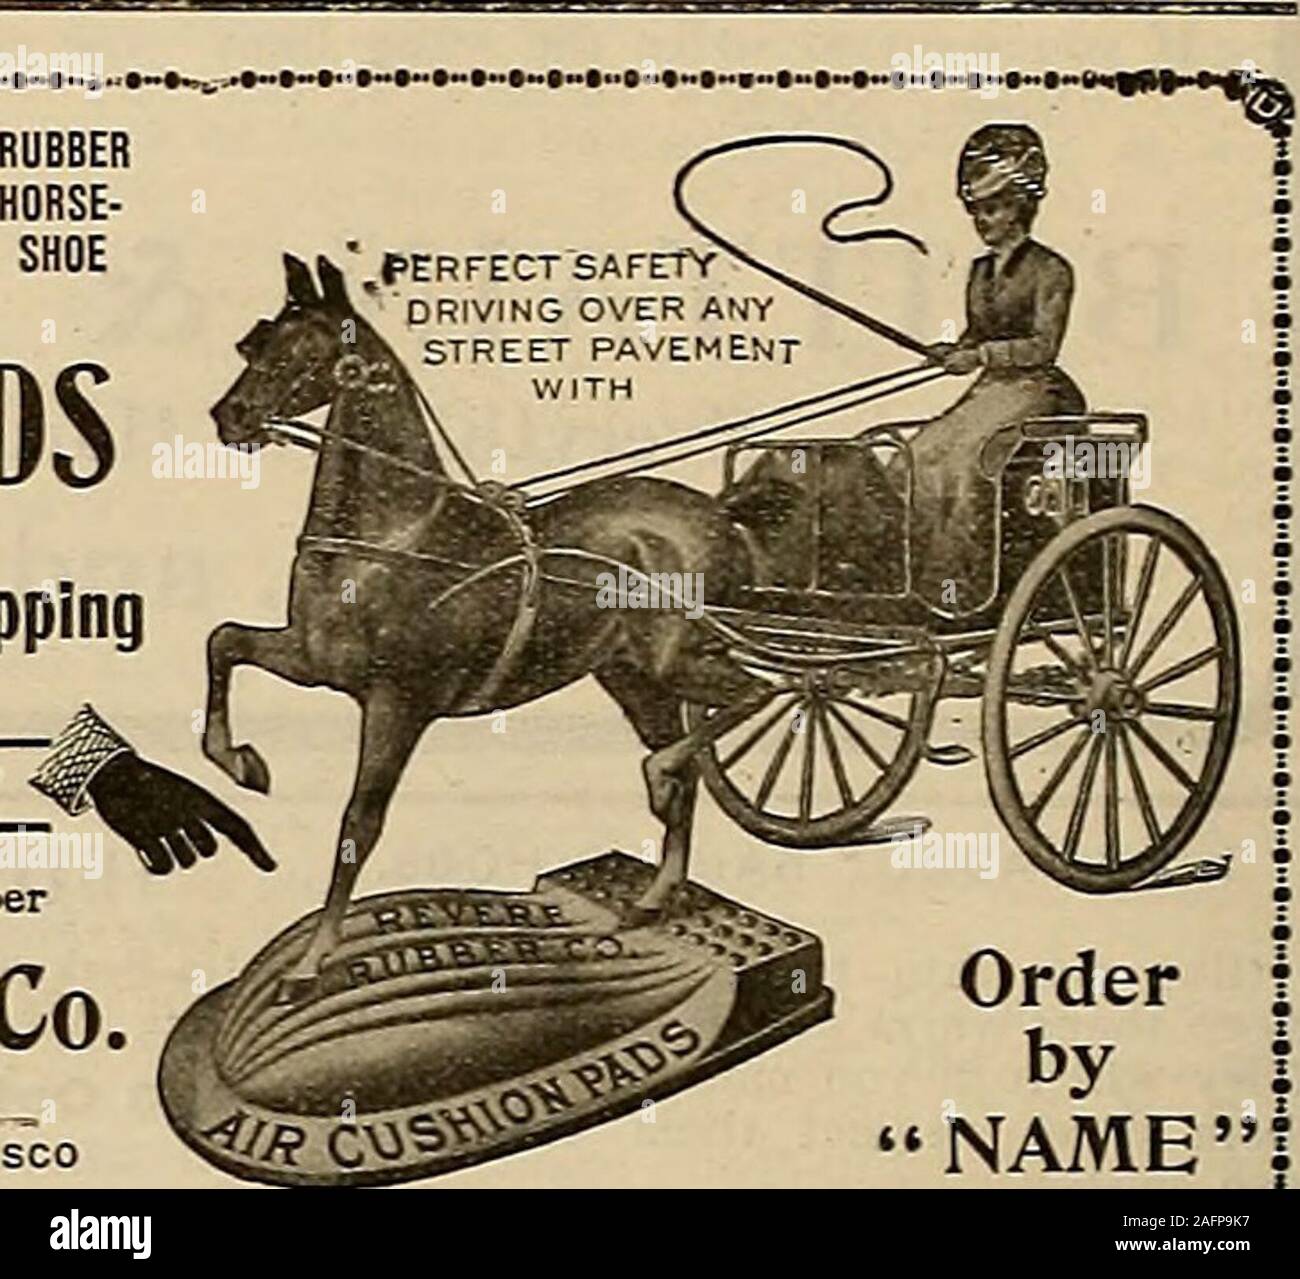 . Breeder and sportsman. High-class breeding stock. Correspondence so-licited. PHOTO ENGRAVING COMPANY High Class Art —in— HALFTONES AND LINE ENGRAVING Artistic Designing1.141 Valencia St. San Francisco There is only one RTJBBERCID BOOTING Weather Proof, Acid Proof, Fire Re- WE SELL IT. BONESTELL. RICHARDSON & CO., 473-485 Sixth St., San Francisco, CaL JAMES H. GROVE (R. R. Sayer, Atty.) WILLIAM G. TORLEY LAWRENCE STOCK FARM HIGH CLASS HORSES BOUGHT AND SOLD. BROOD MARES CARED FOR AND BRED ACCORDING TO INSTRUCTIONS Futurity Stake Candidates and Candidates for the M. and M. and C. of C. Stakes Stock Photo